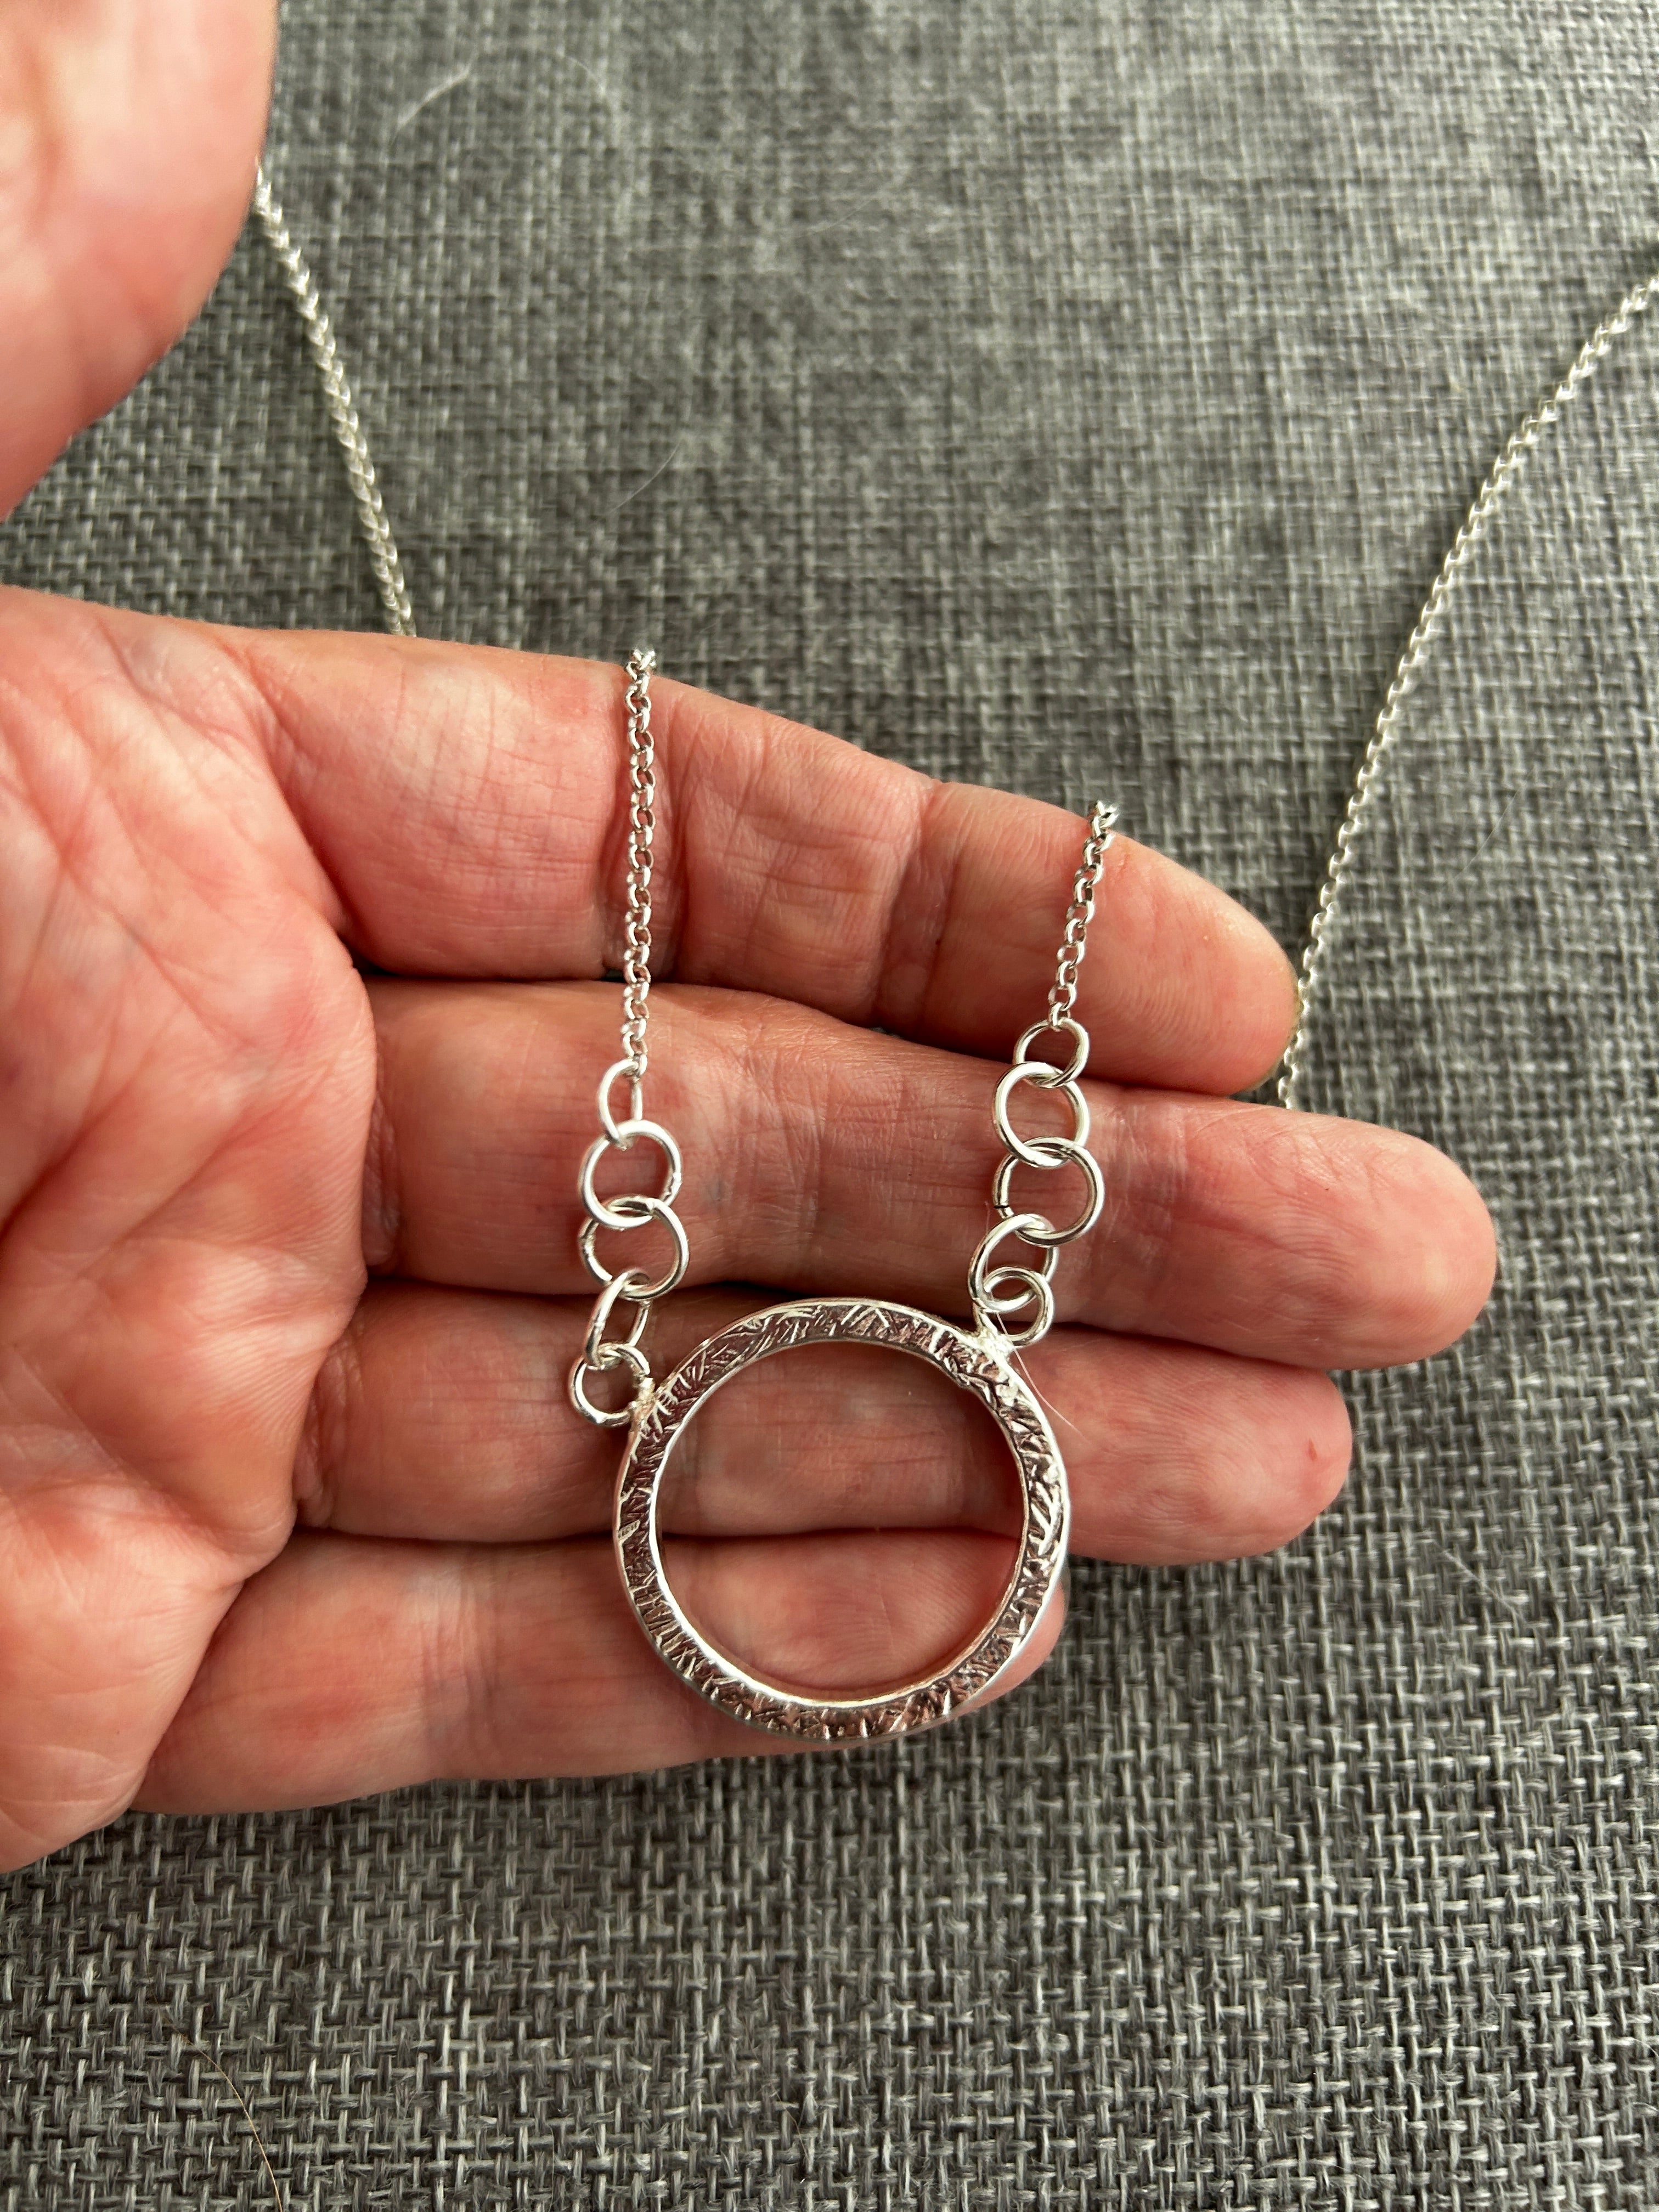 Handcrafted Sterling Silver Circle Necklace